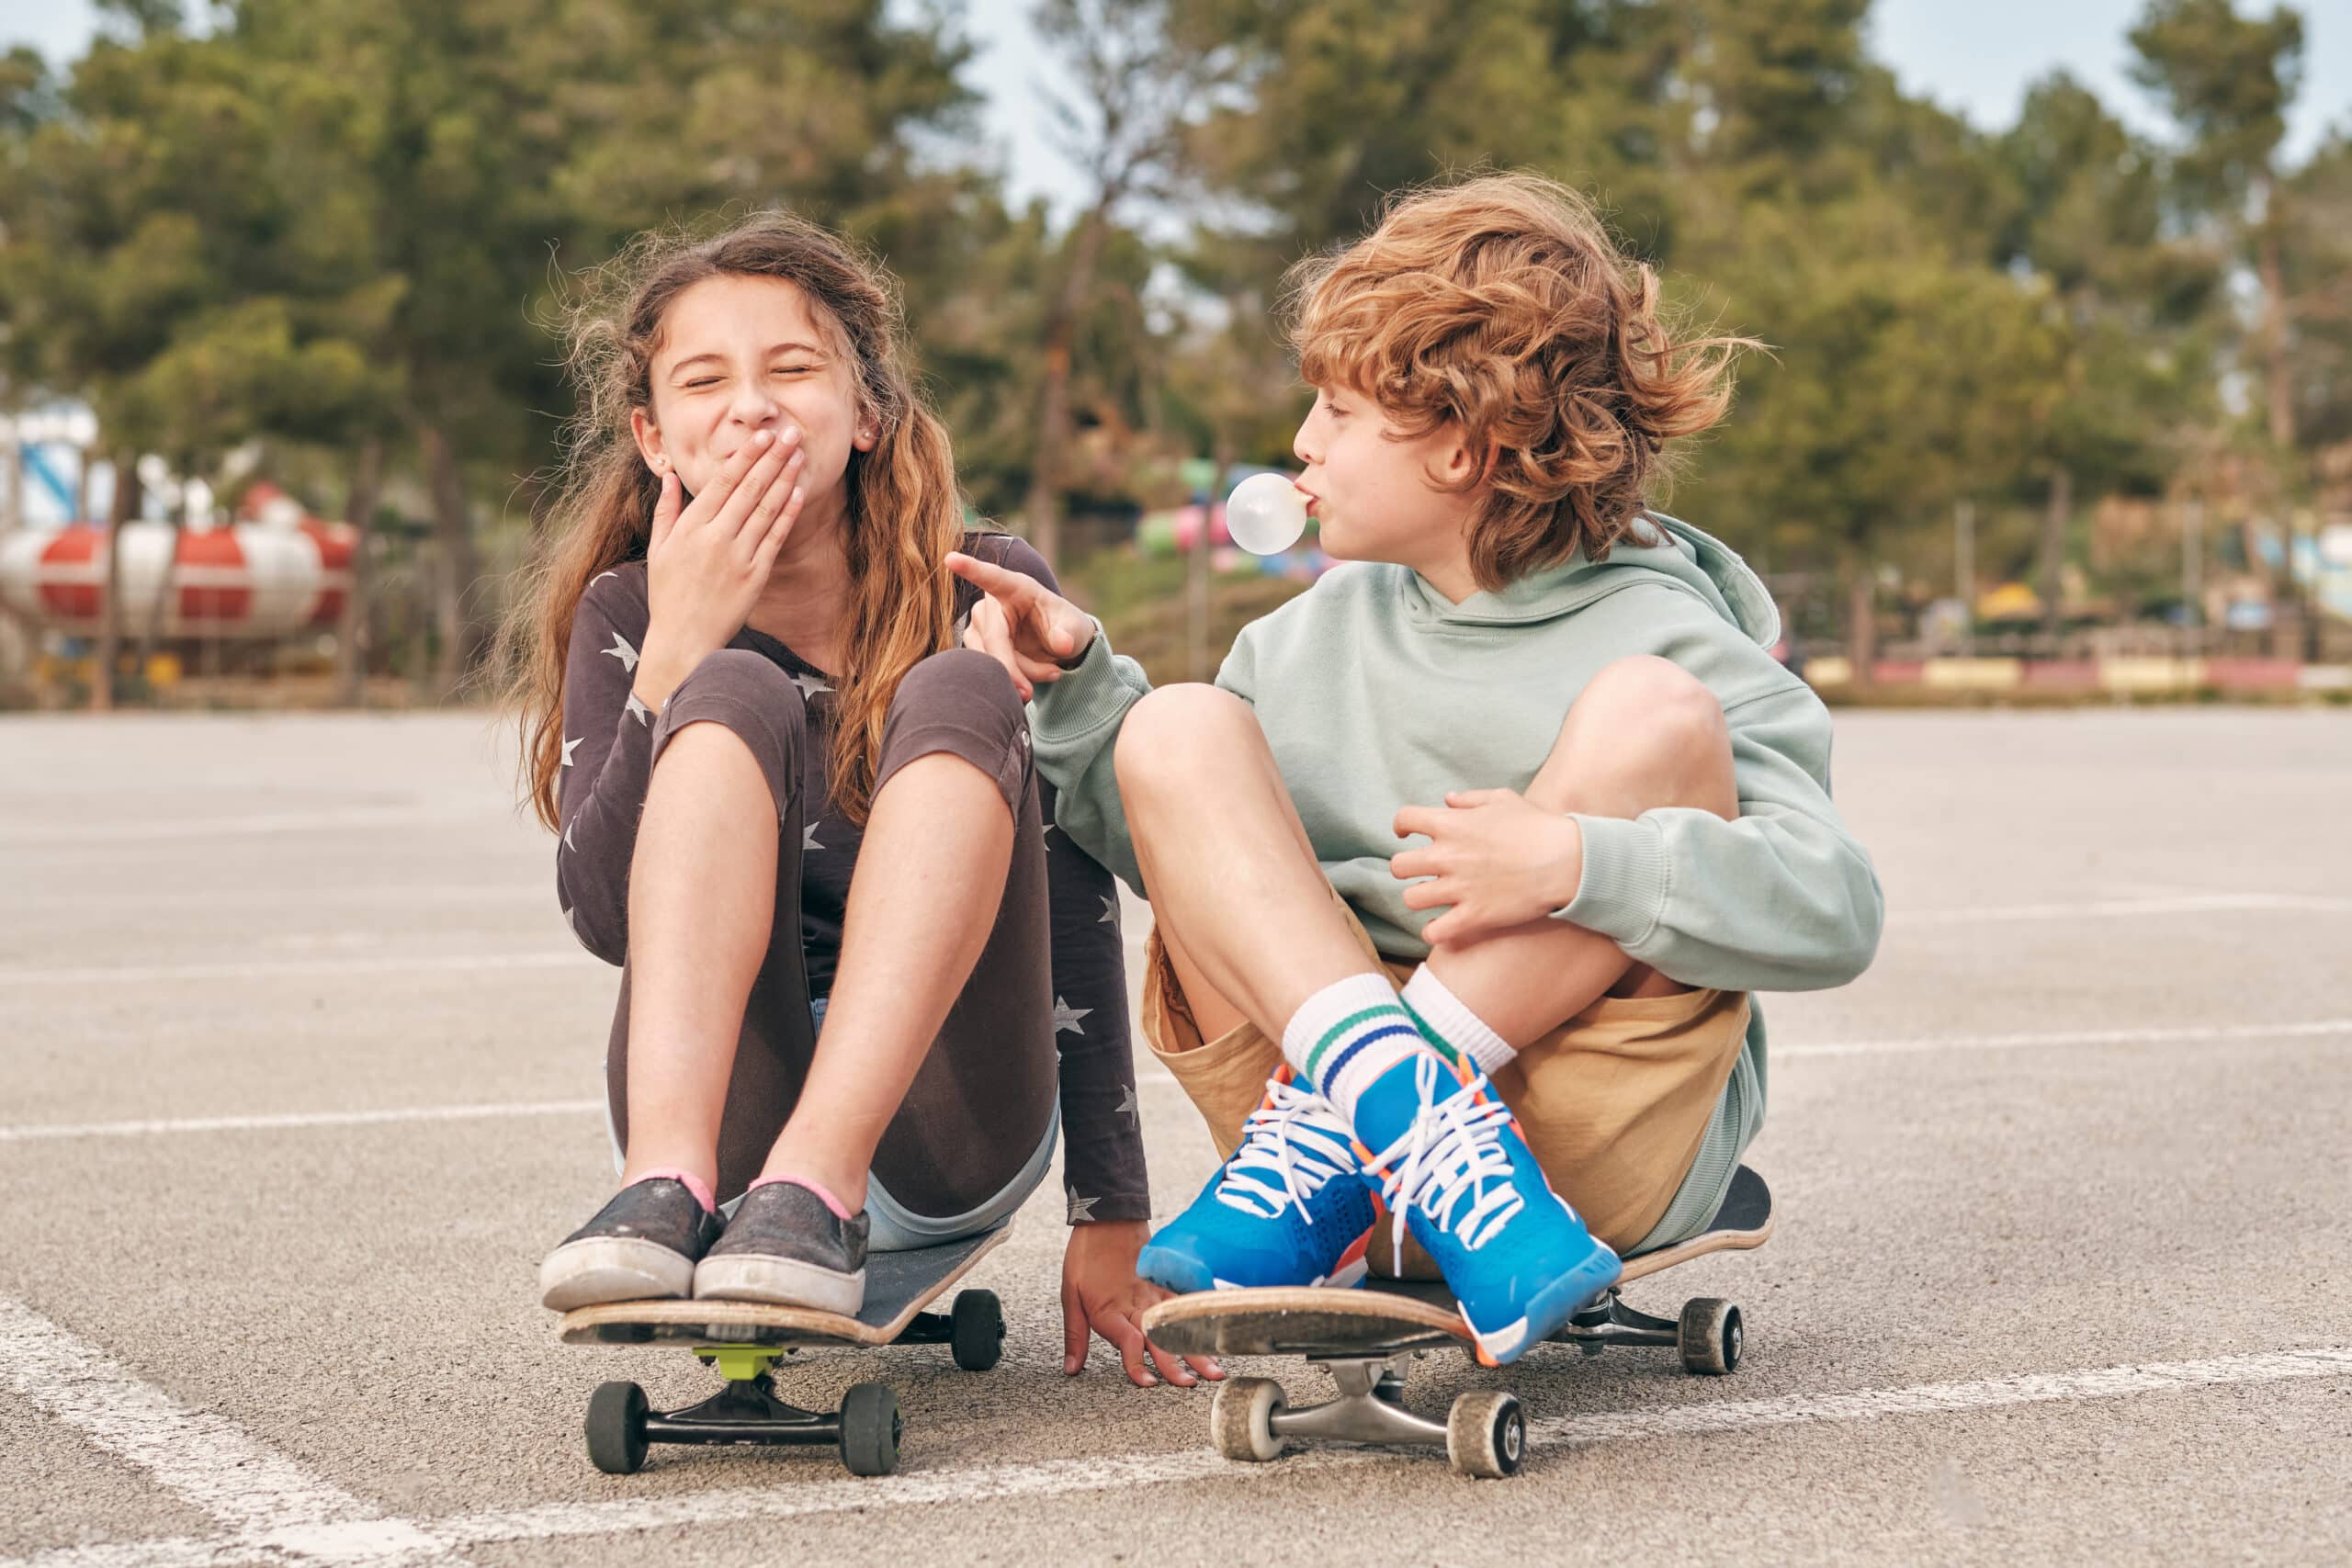 Delighted teenage boy and girl blowing chewing gum while sitting on skateboards in city and having fun together at weekend